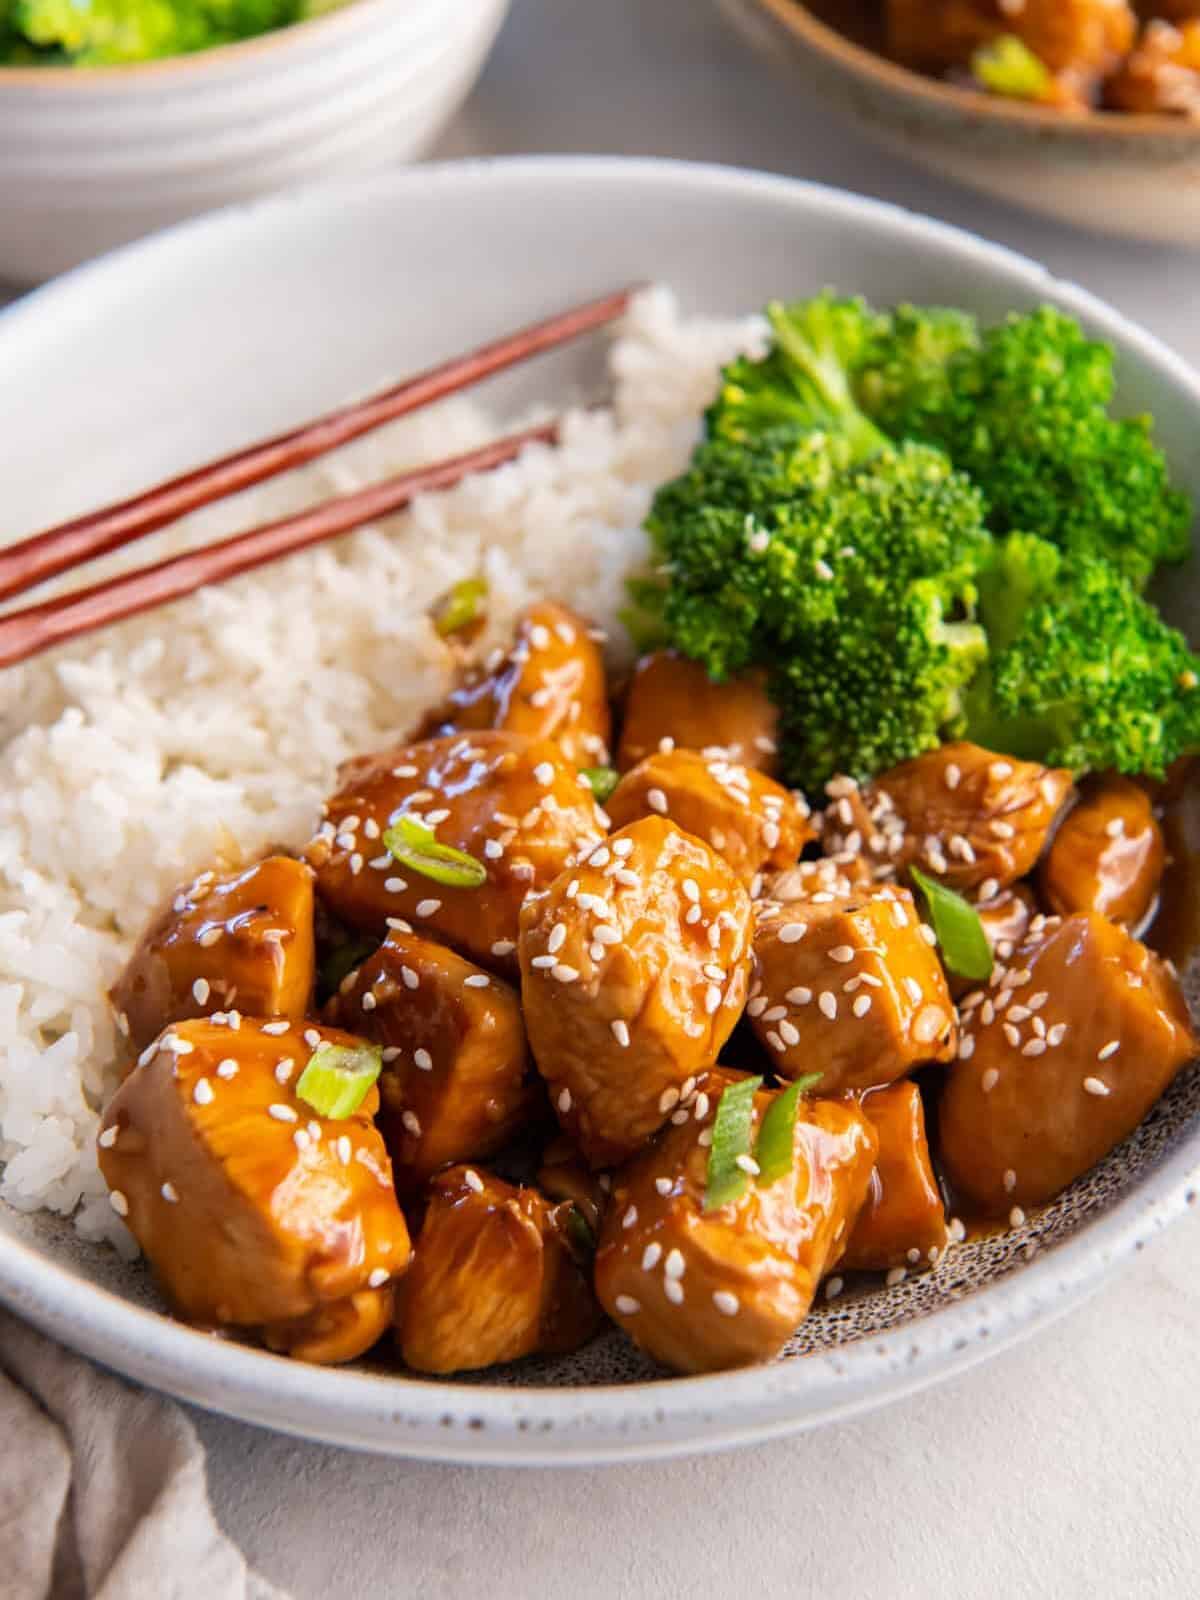 three-quarters view of mandarin chicken in a gray bowl with rice, broccoli, and chopsticks.